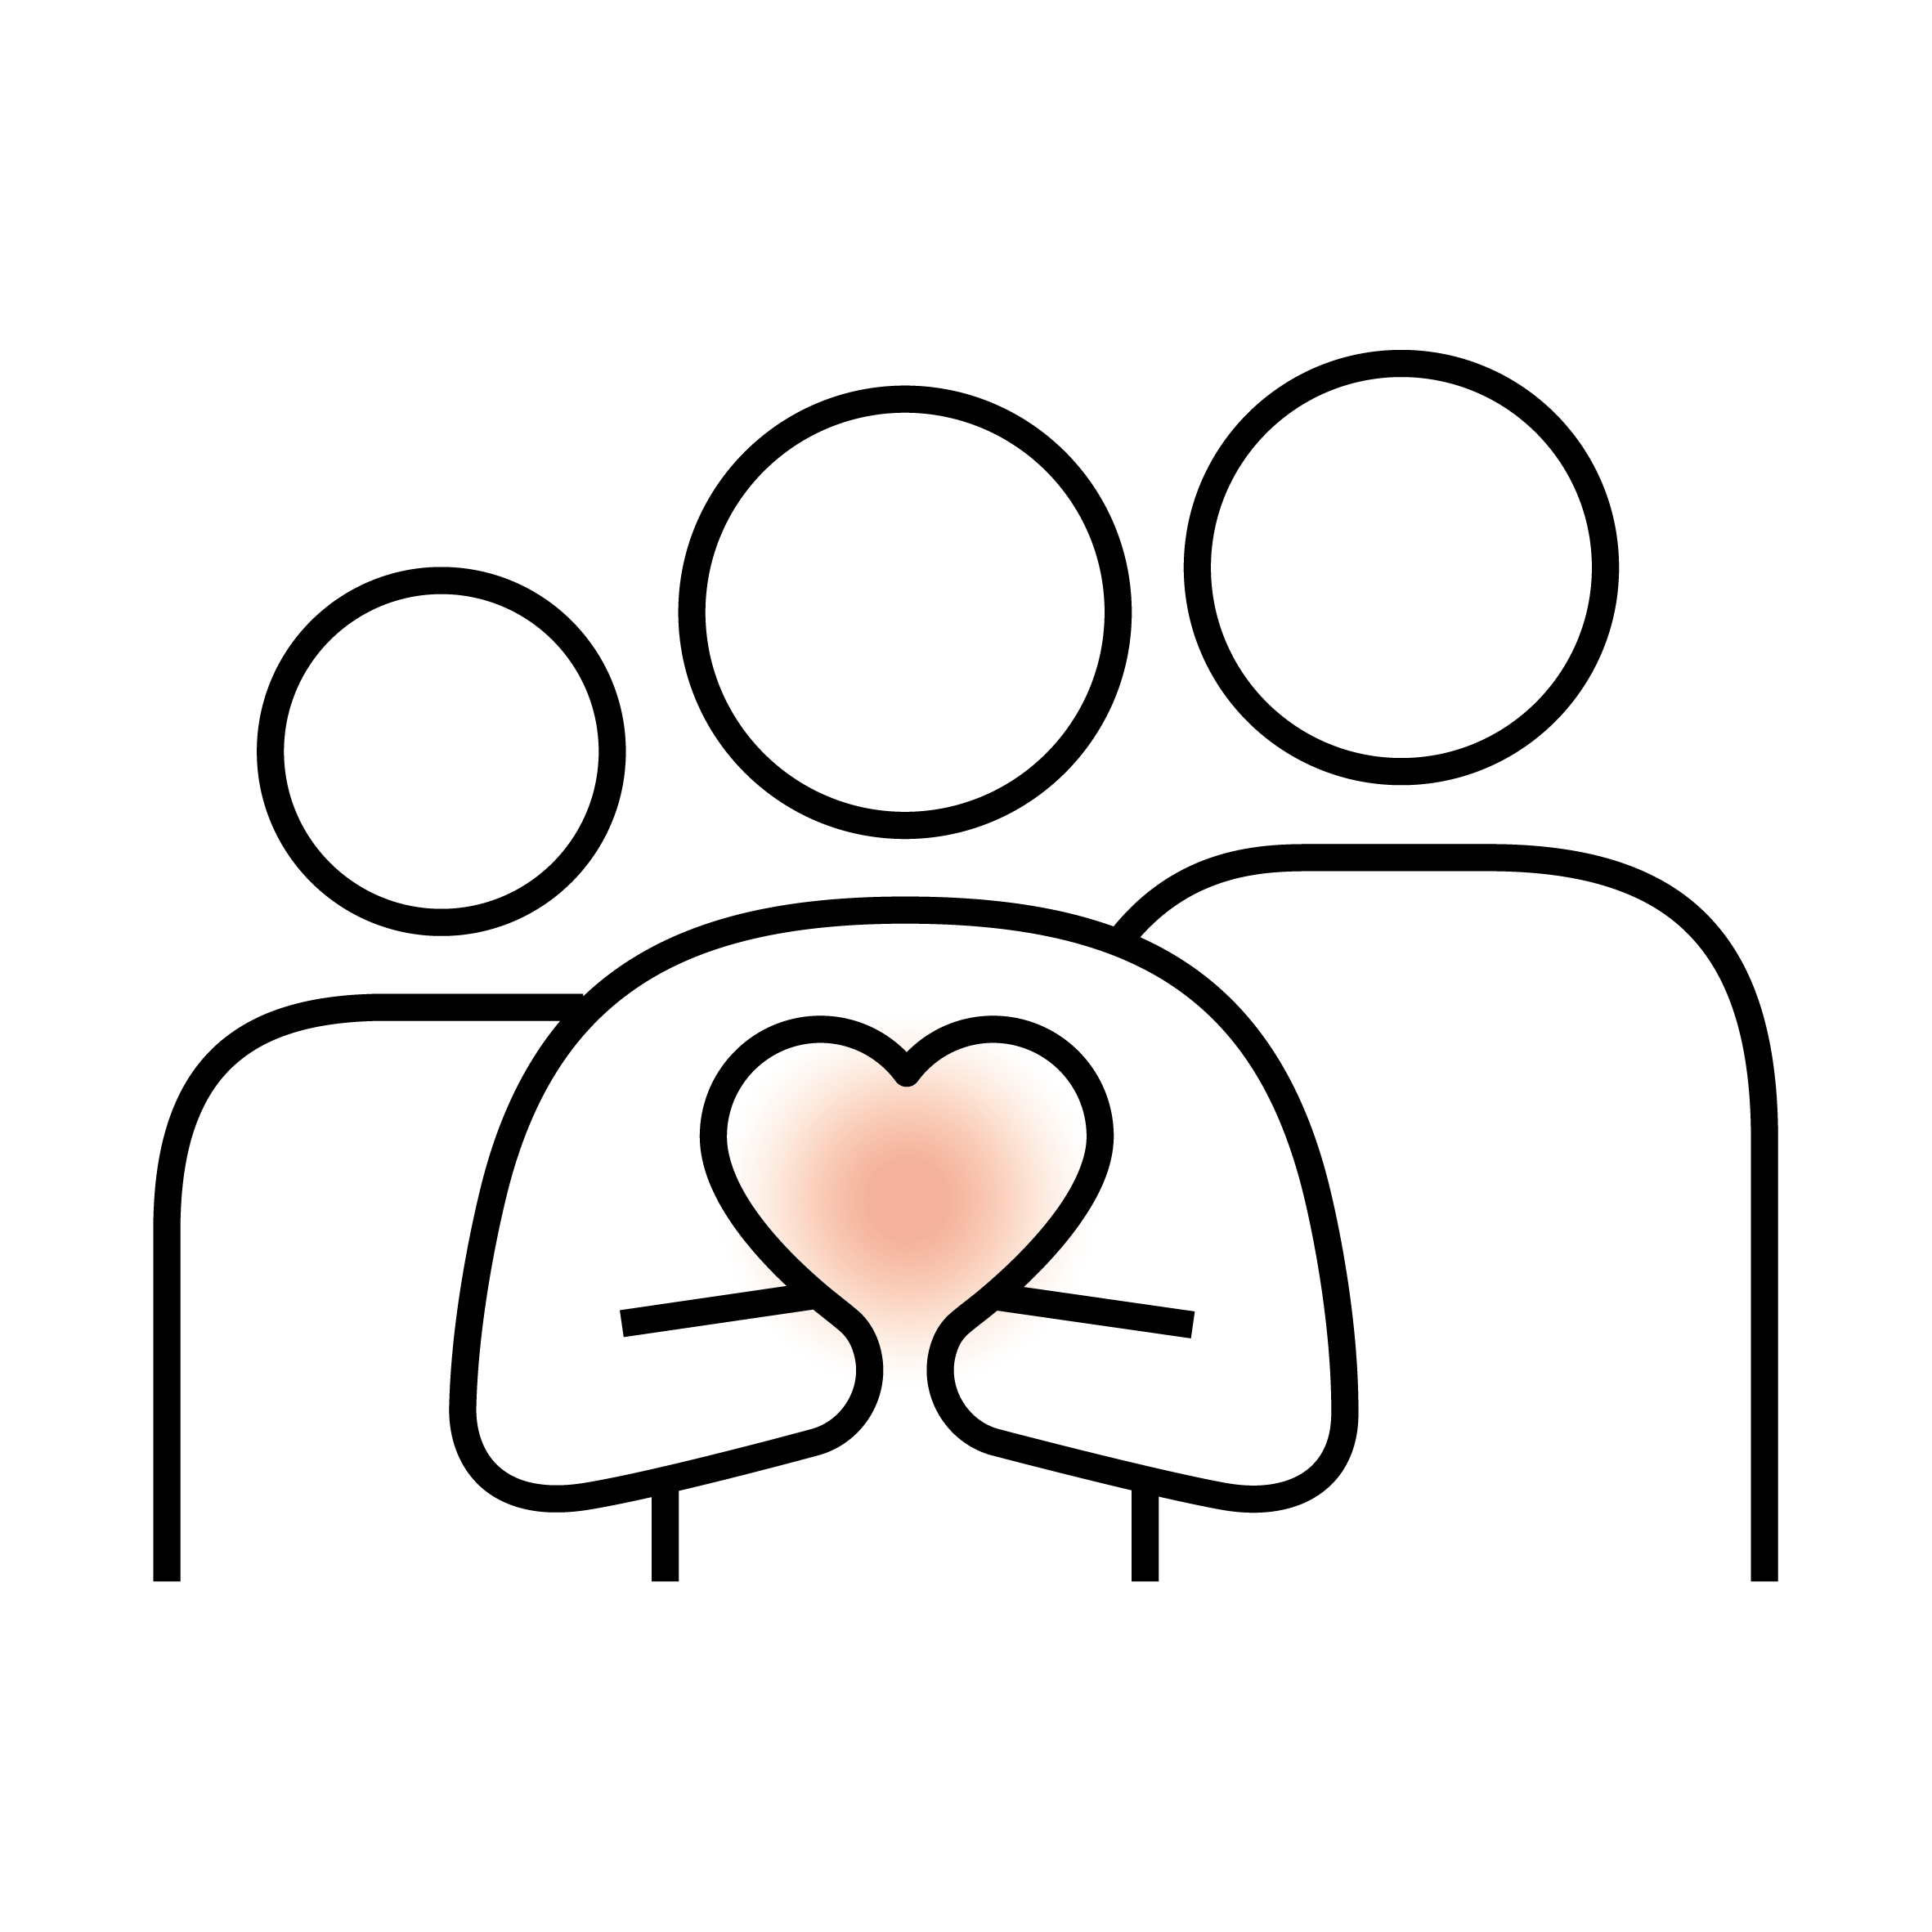 "Icon of a family with a heart symbol, stylised illustration of social ties and love."